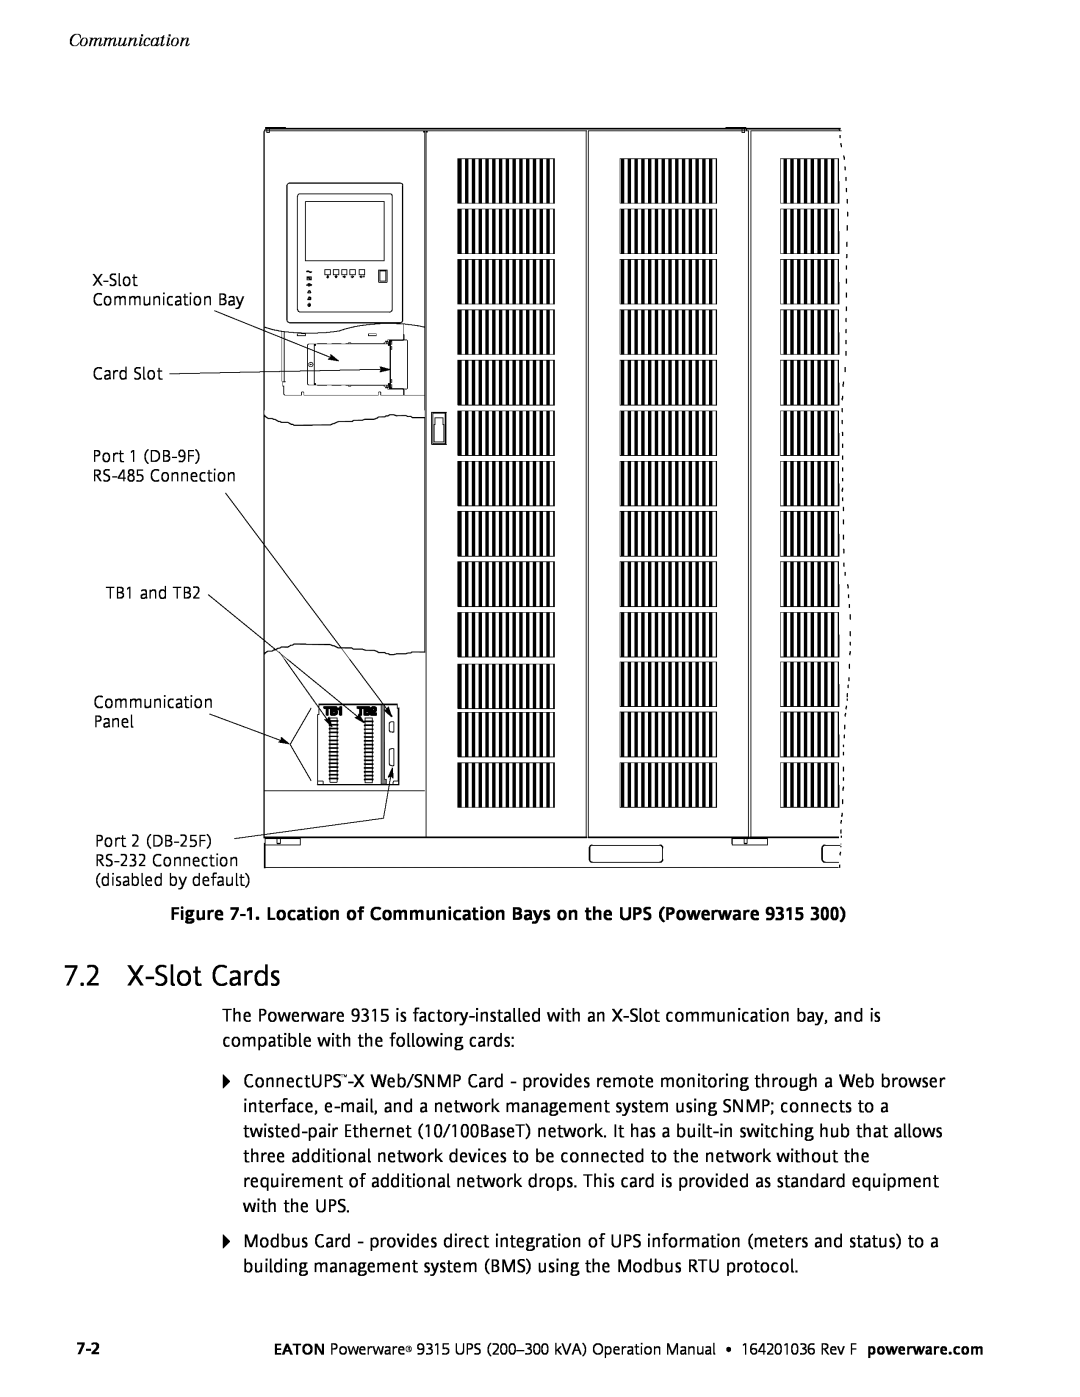 Eaton Electrical operation manual X-Slot Cards, 1. Location of Communication Bays on the UPS Powerware 9315 